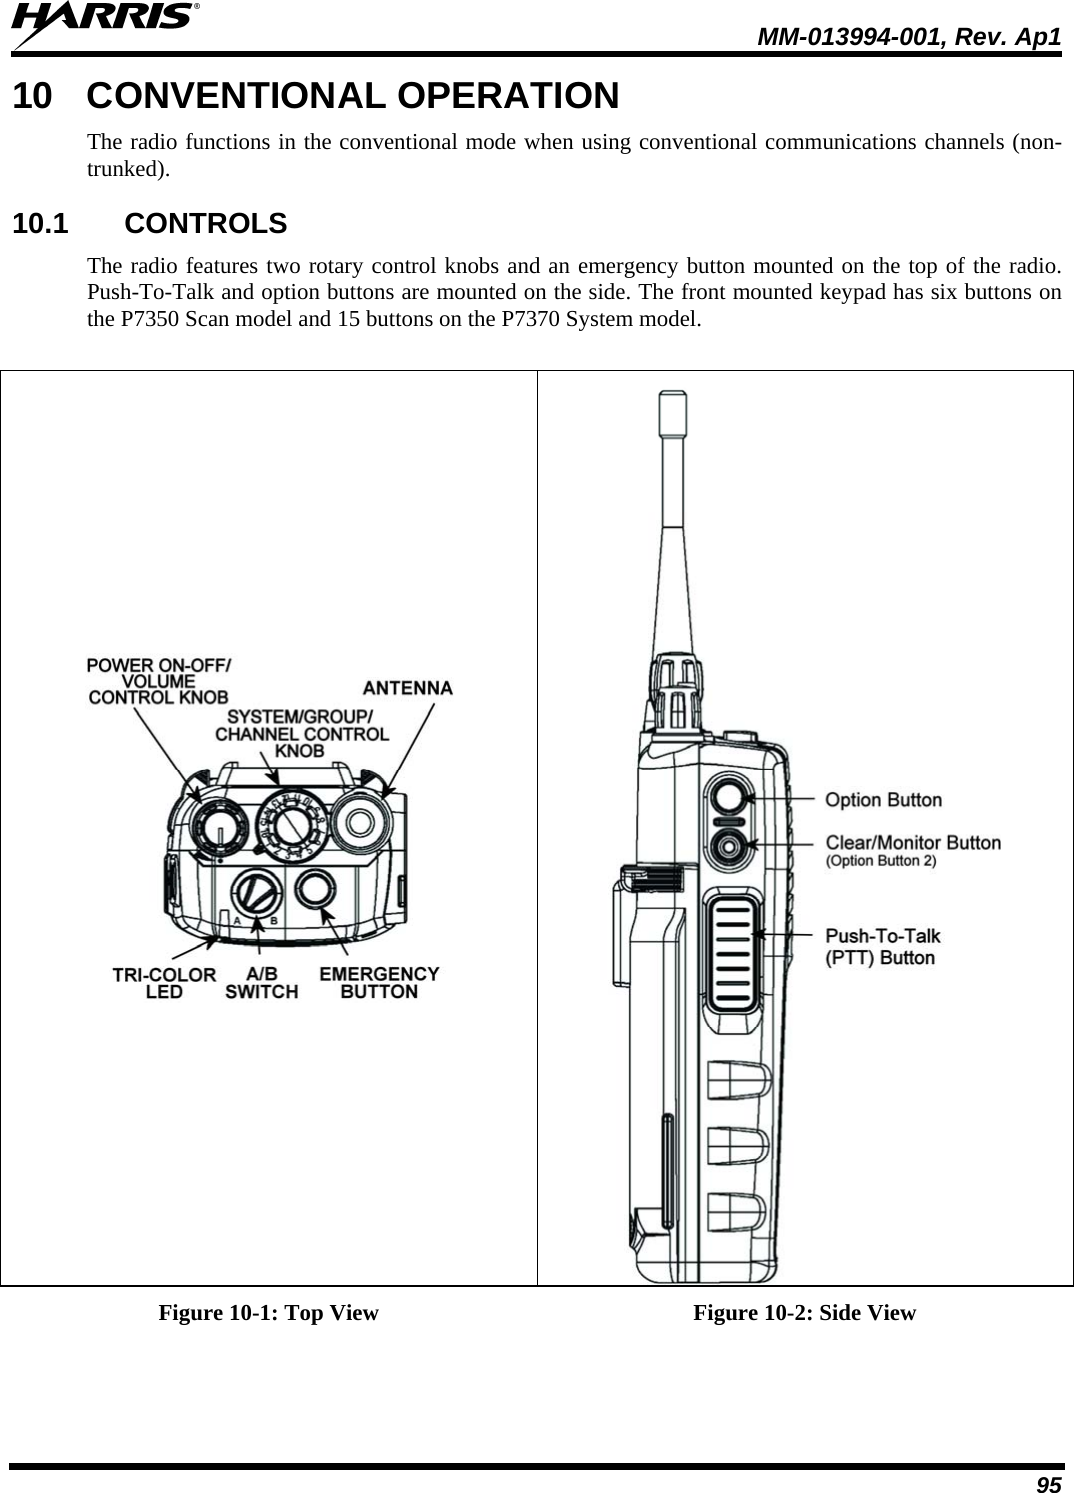  MM-013994-001, Rev. Ap1 95 10 CONVENTIONAL OPERATION The radio functions in the conventional mode when using conventional communications channels (non-trunked).  10.1 CONTROLS The radio features two rotary control knobs and an emergency button mounted on the top of the radio. Push-To-Talk and option buttons are mounted on the side. The front mounted keypad has six buttons on the P7350 Scan model and 15 buttons on the P7370 System model.    Figure 10-1: Top View  Figure 10-2: Side View 